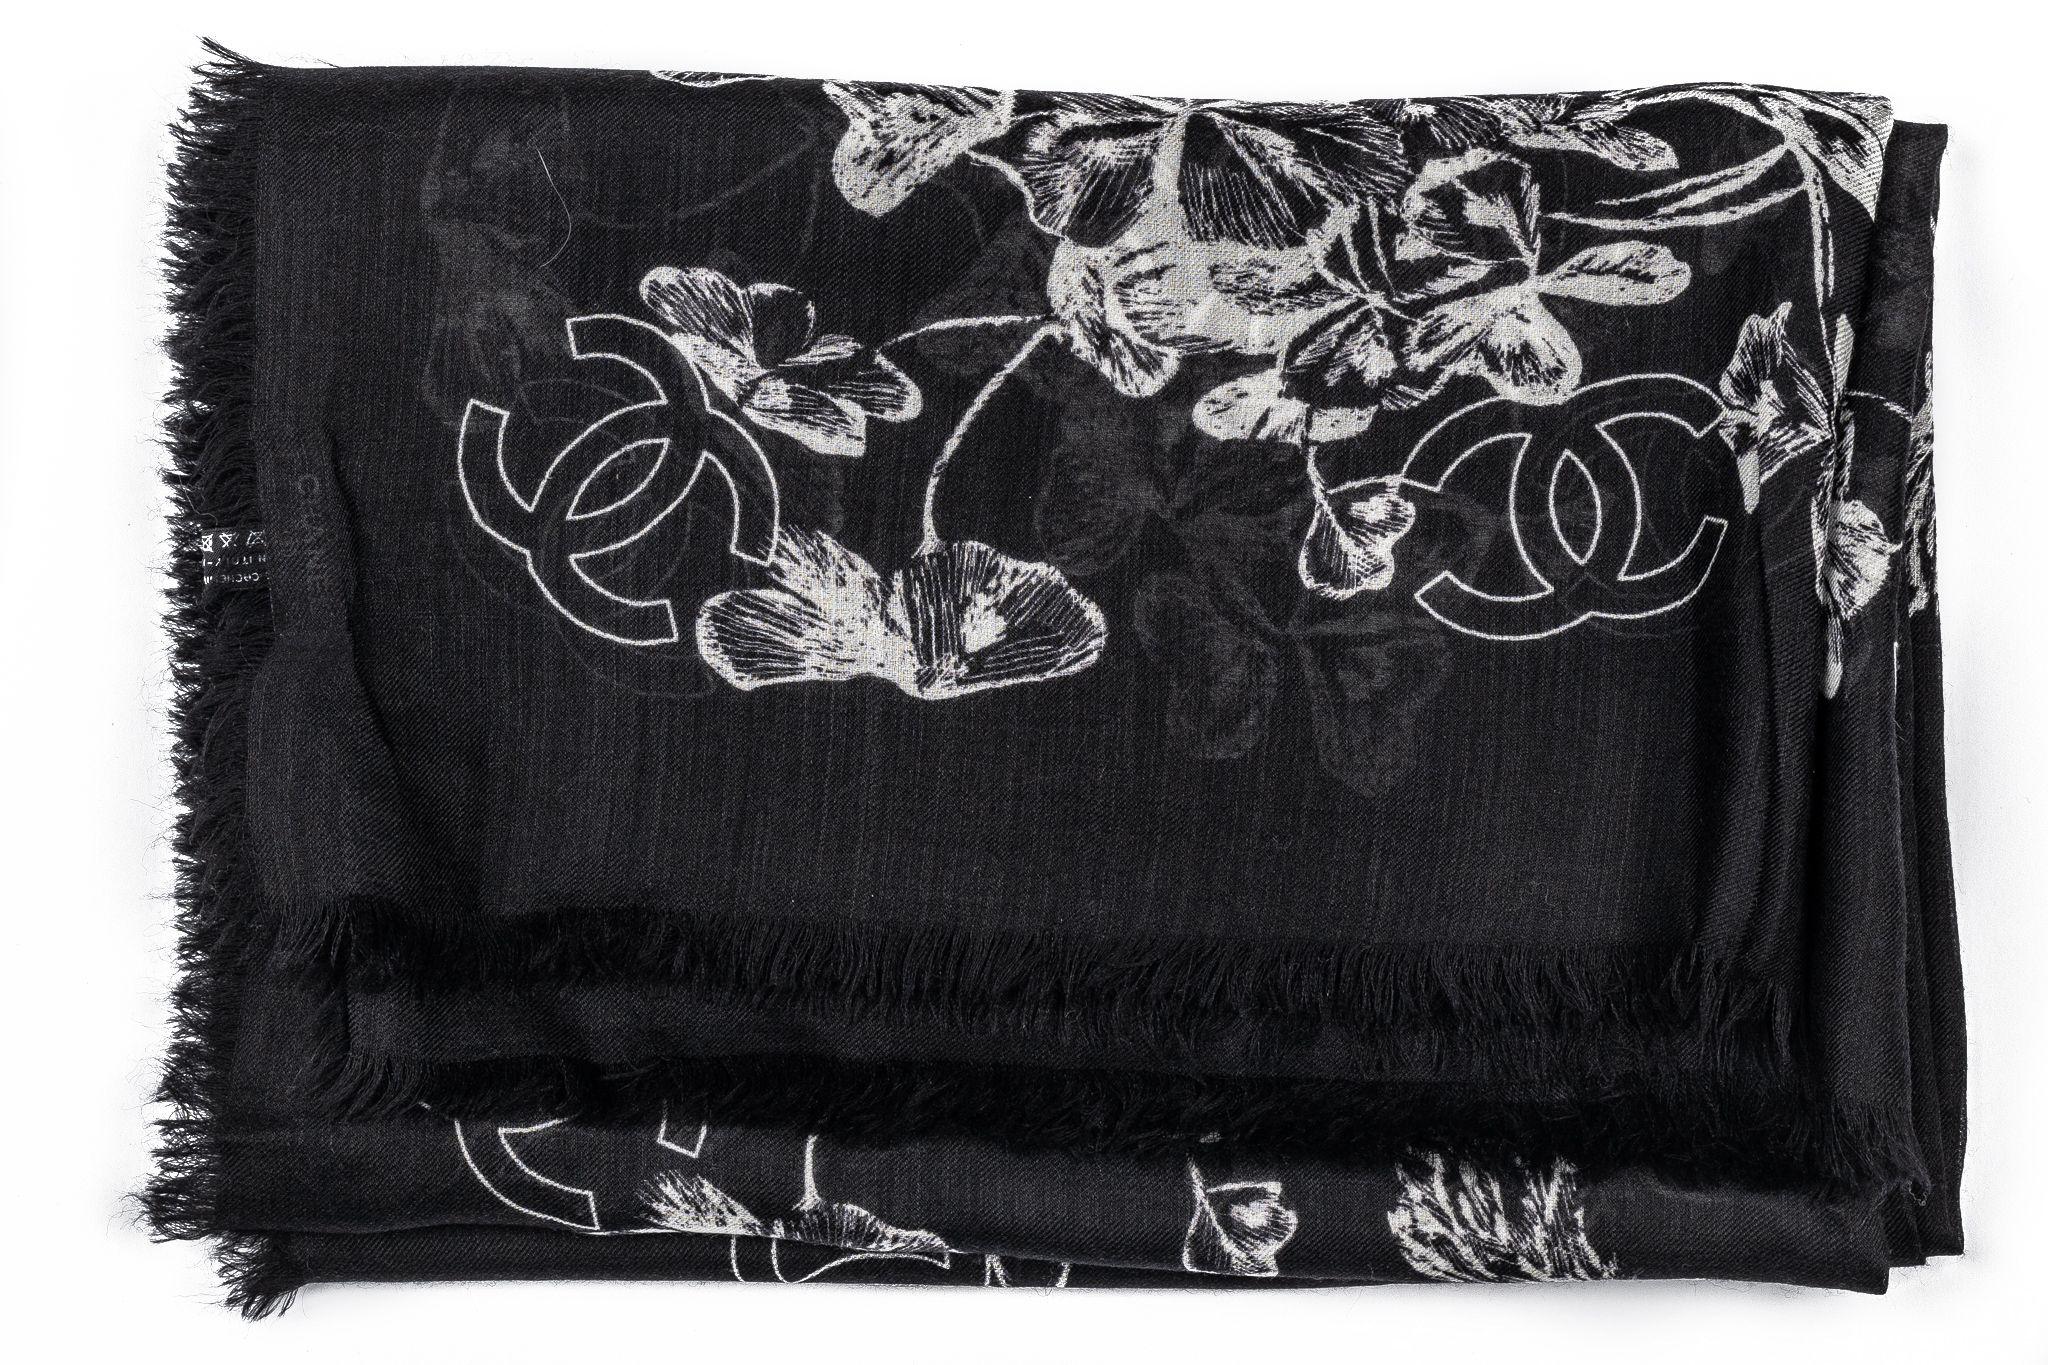 Chanel Cashmere Shawl in black with a frame featuring floral print. In new condition.